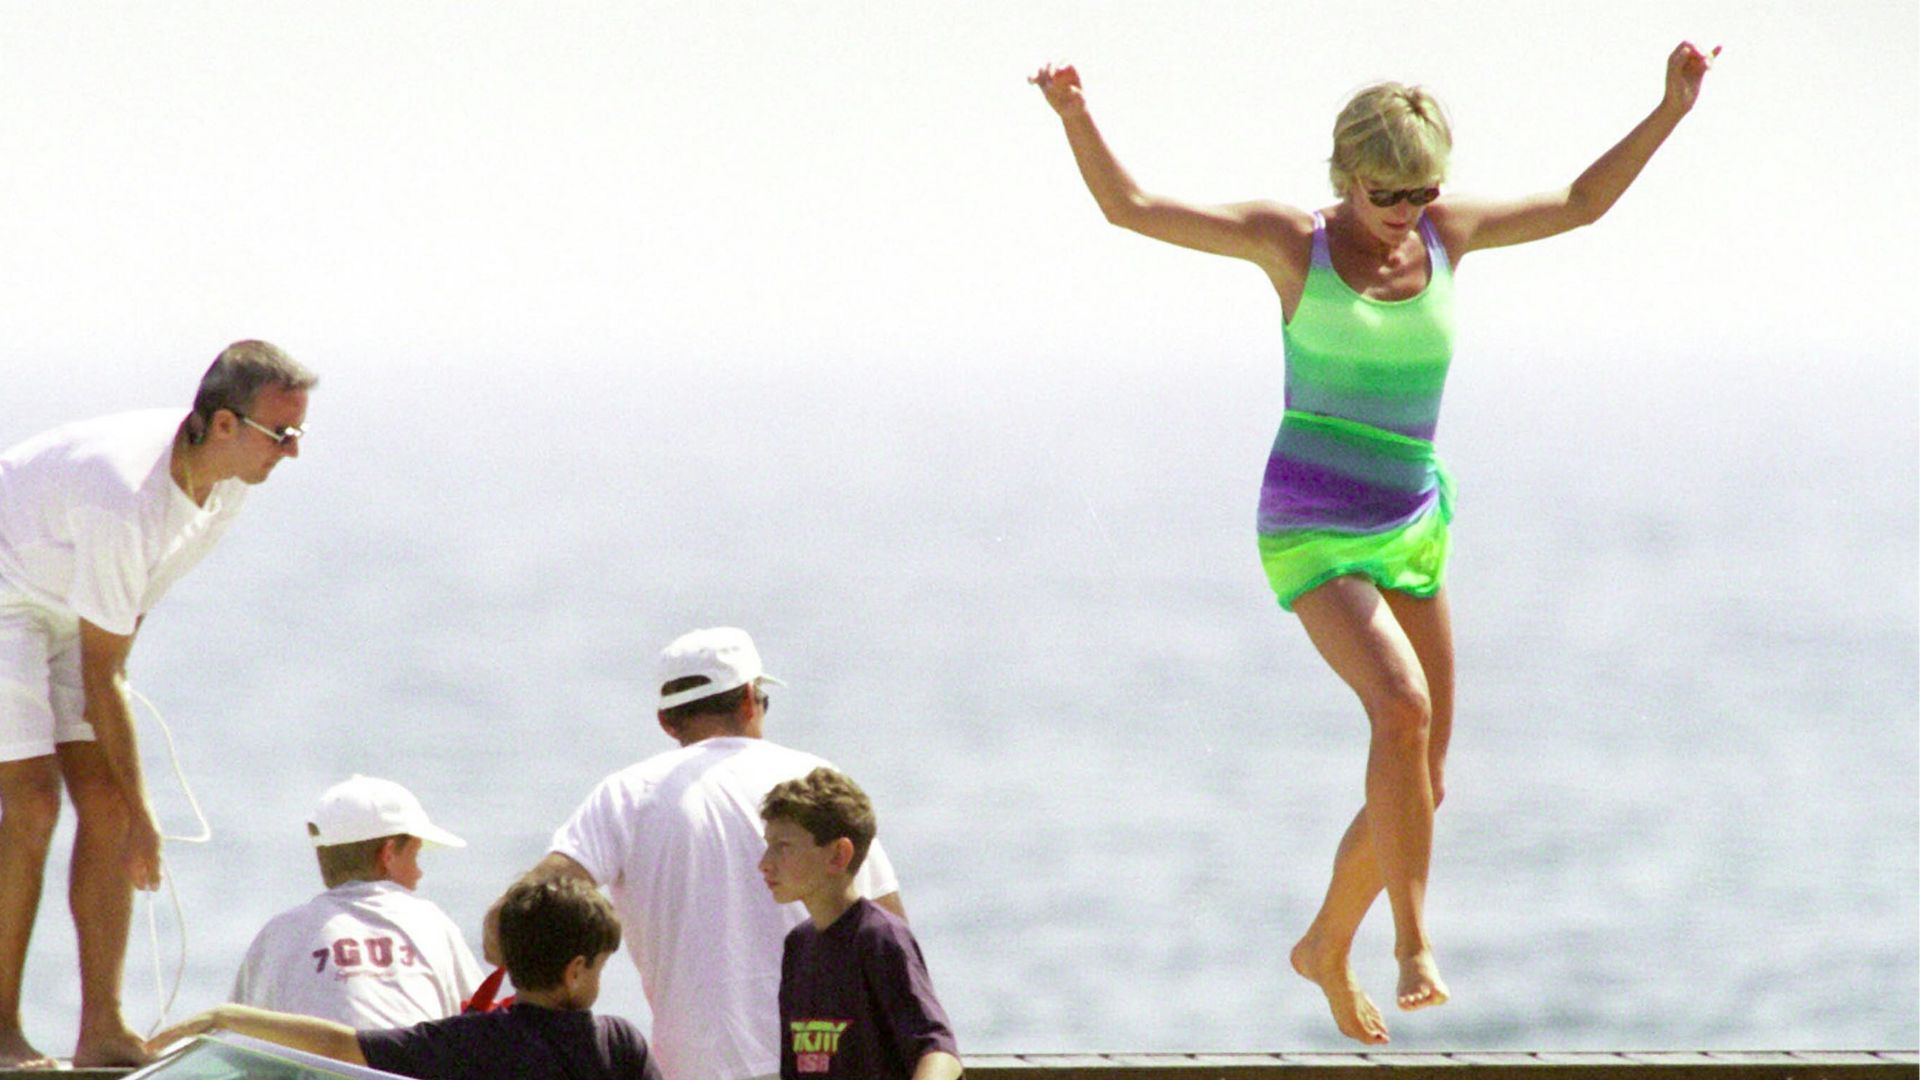 <p>                     Undoubtedly, one of Princess Diana's best fashion moments is when she sported that iconic acid green one-piece aboard Mohamed Al Fayed's Yacht. Docked on the shores of France’s St Tropez Diana, Dodi, William, and Harry spent idyllic days swimming and sunbathing. In his memoir <em>Spare</em>, Prince Harry notes, “There was much laughter, horseplay, the norm whenever Mummy and Willy and I were together, though even more so on that holiday. Everything about that trip to St. Tropez was heaven. The weather was sublime, the food was tasty, Mummy was smiling."                   </p>